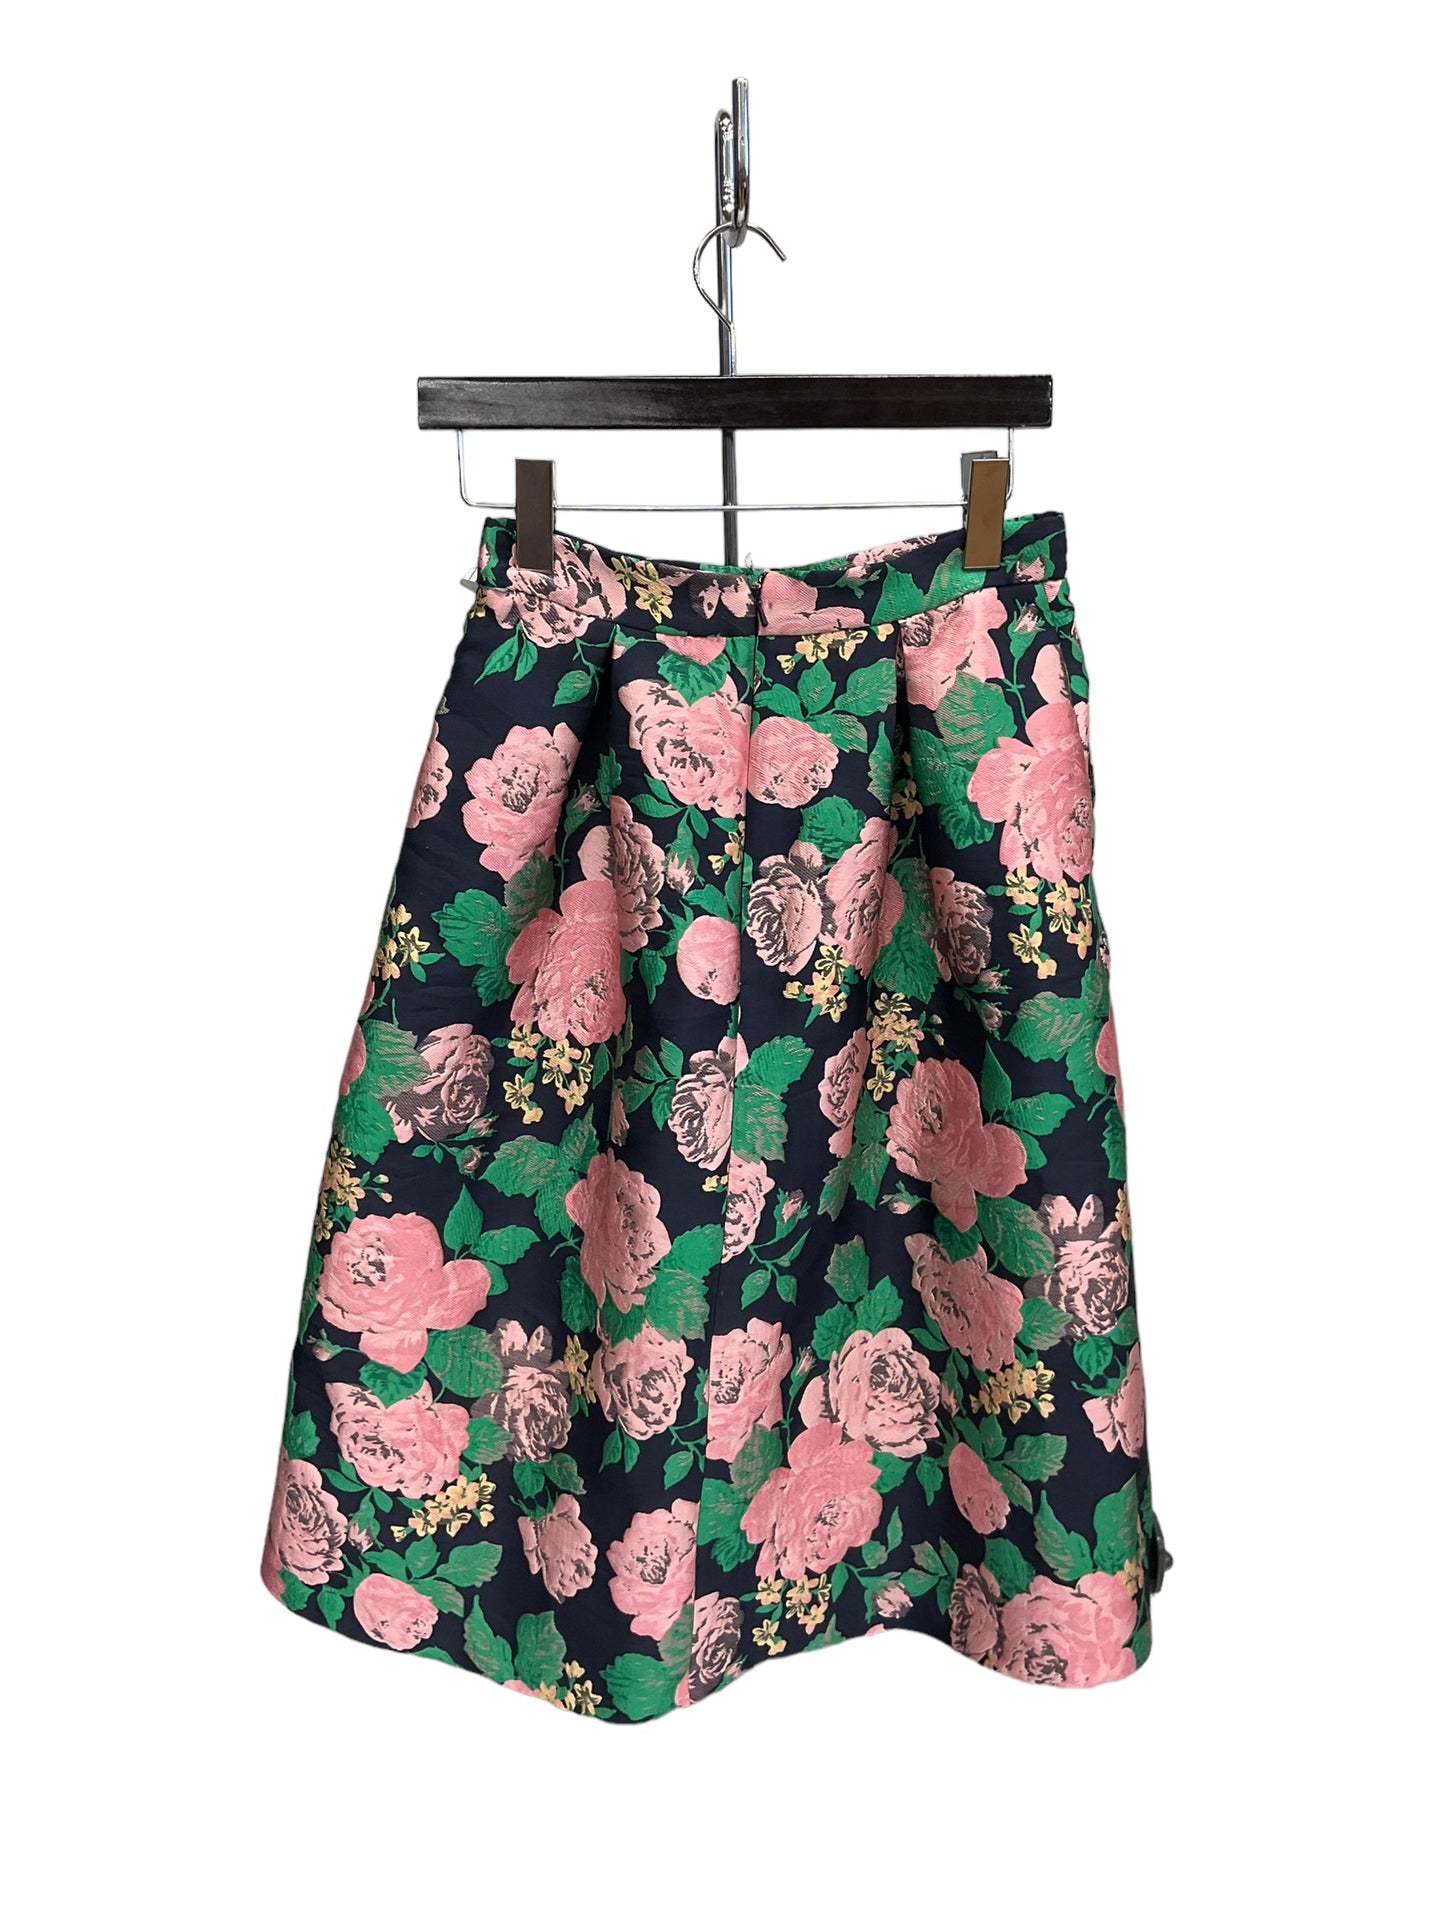 Skirt Midi By Topshop  Size: 4